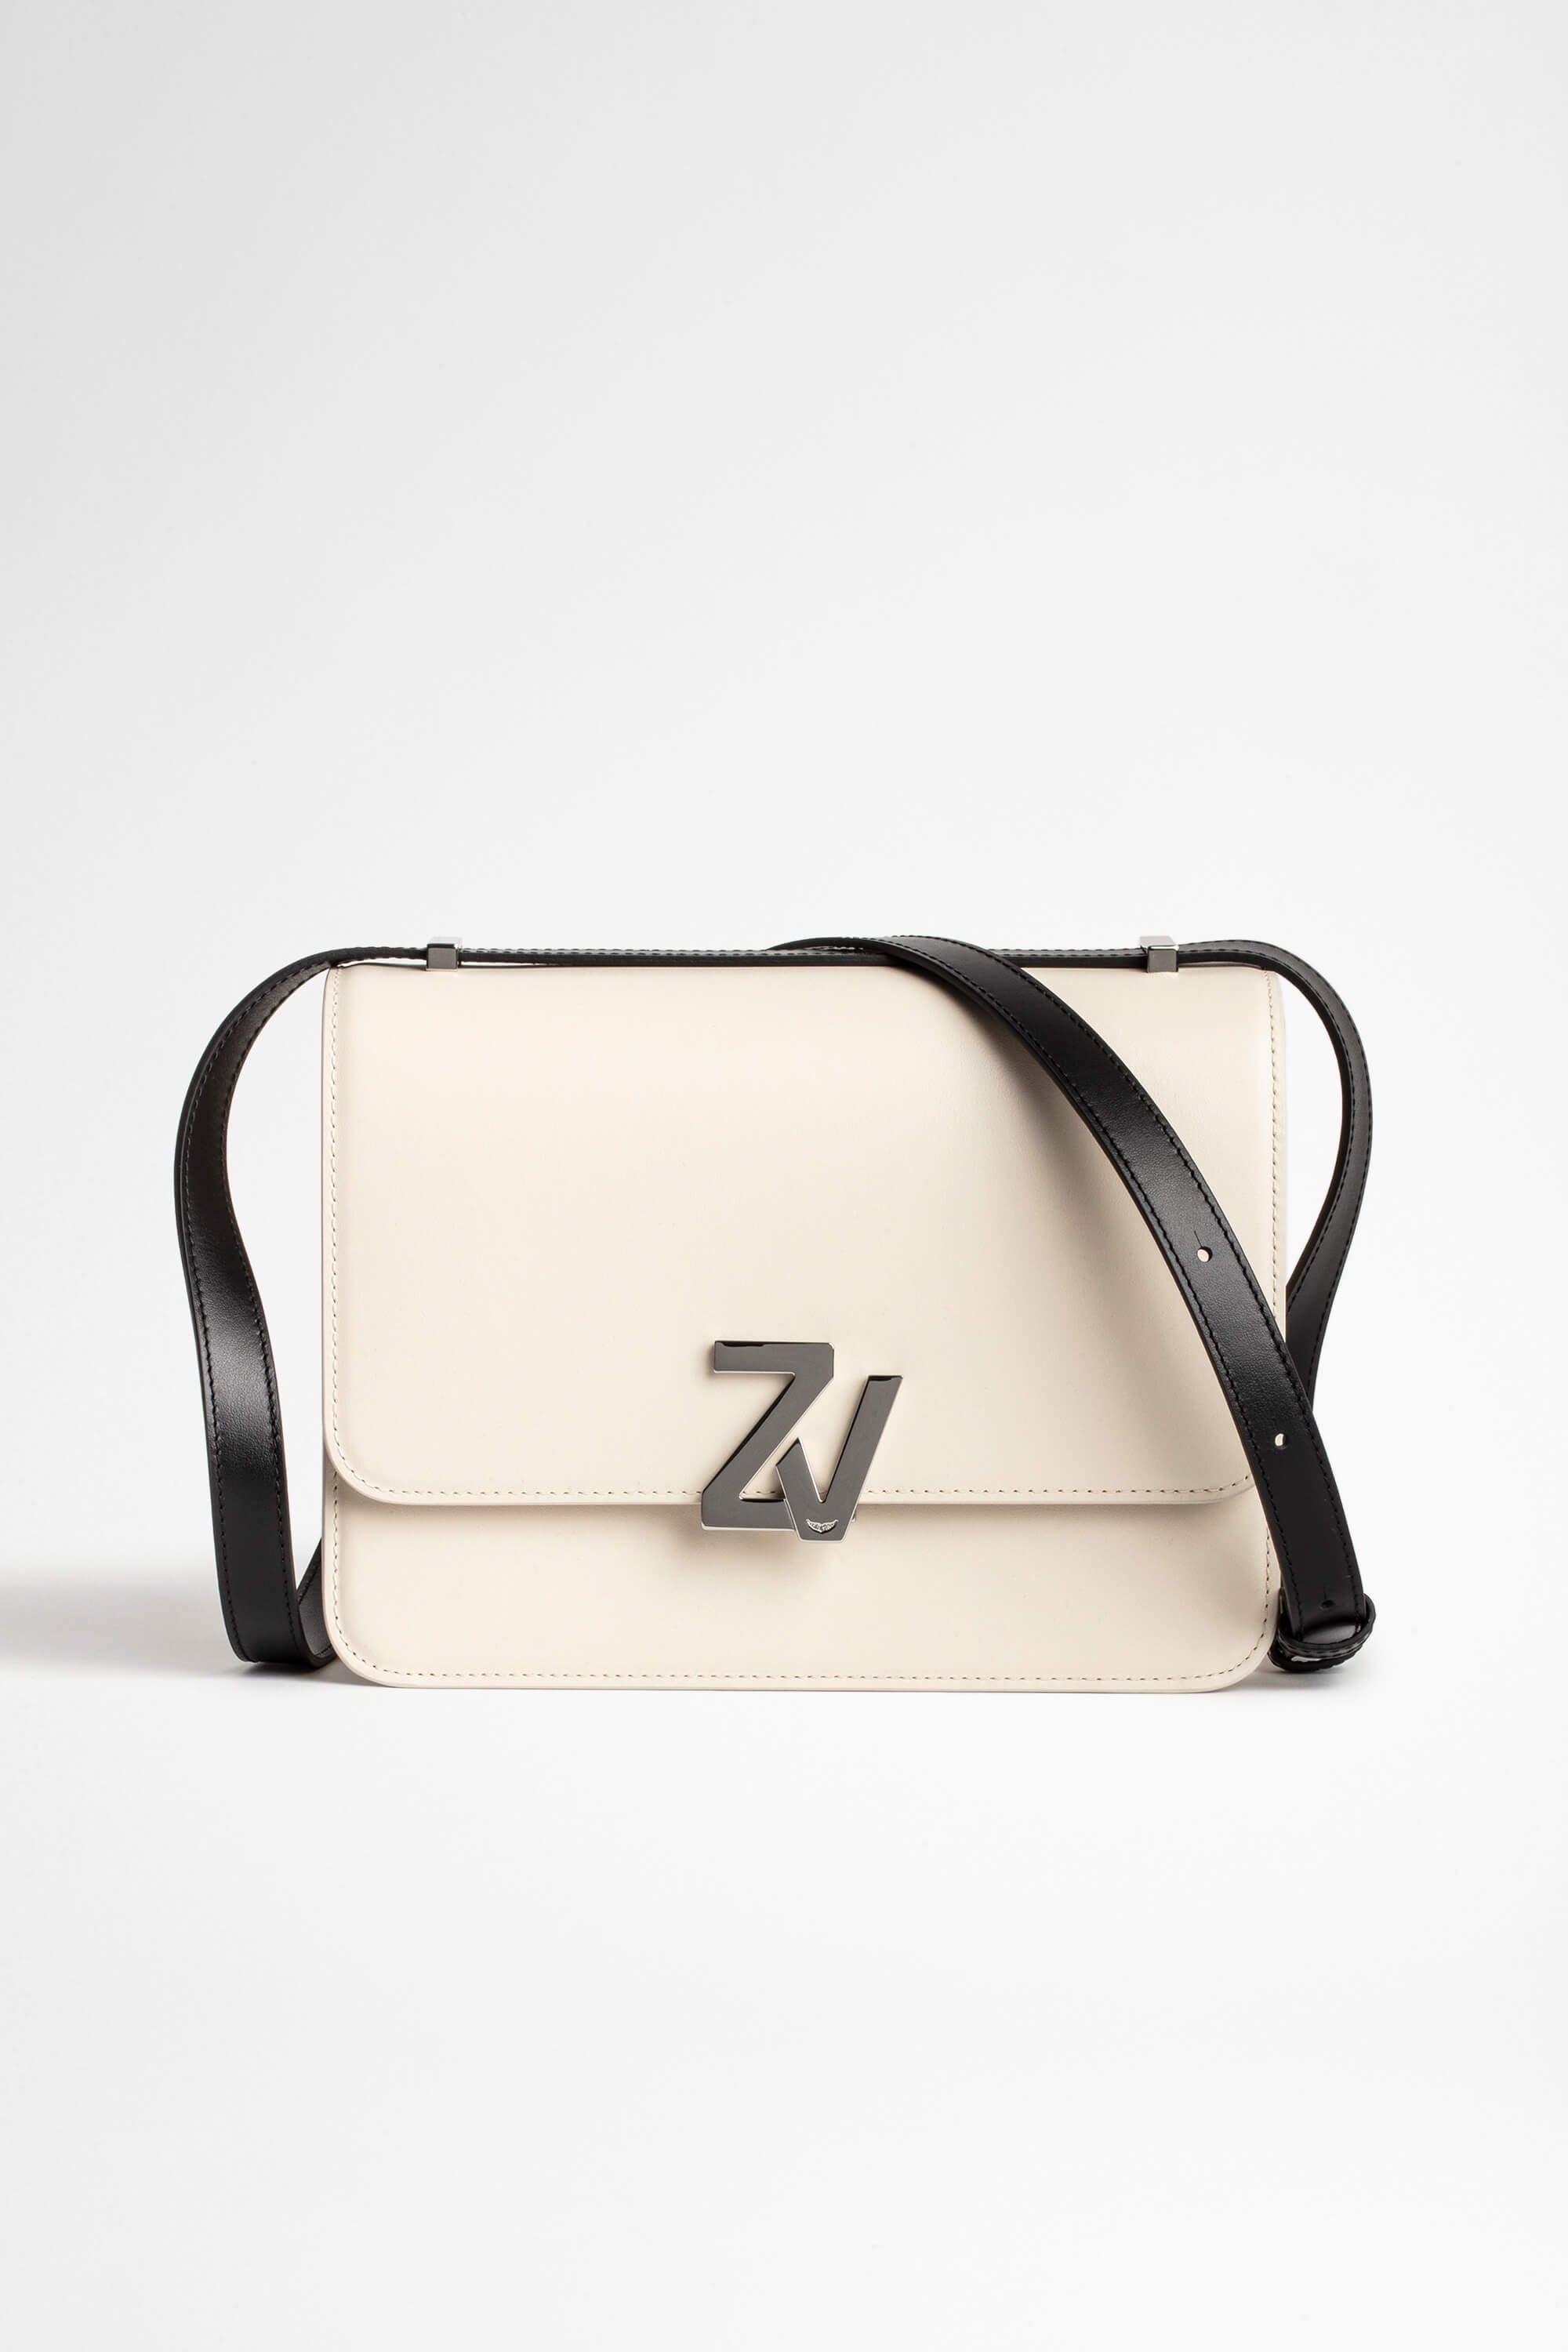 Zadig & Voltaire Leather Zv Initiale Le City Bag in White - Lyst